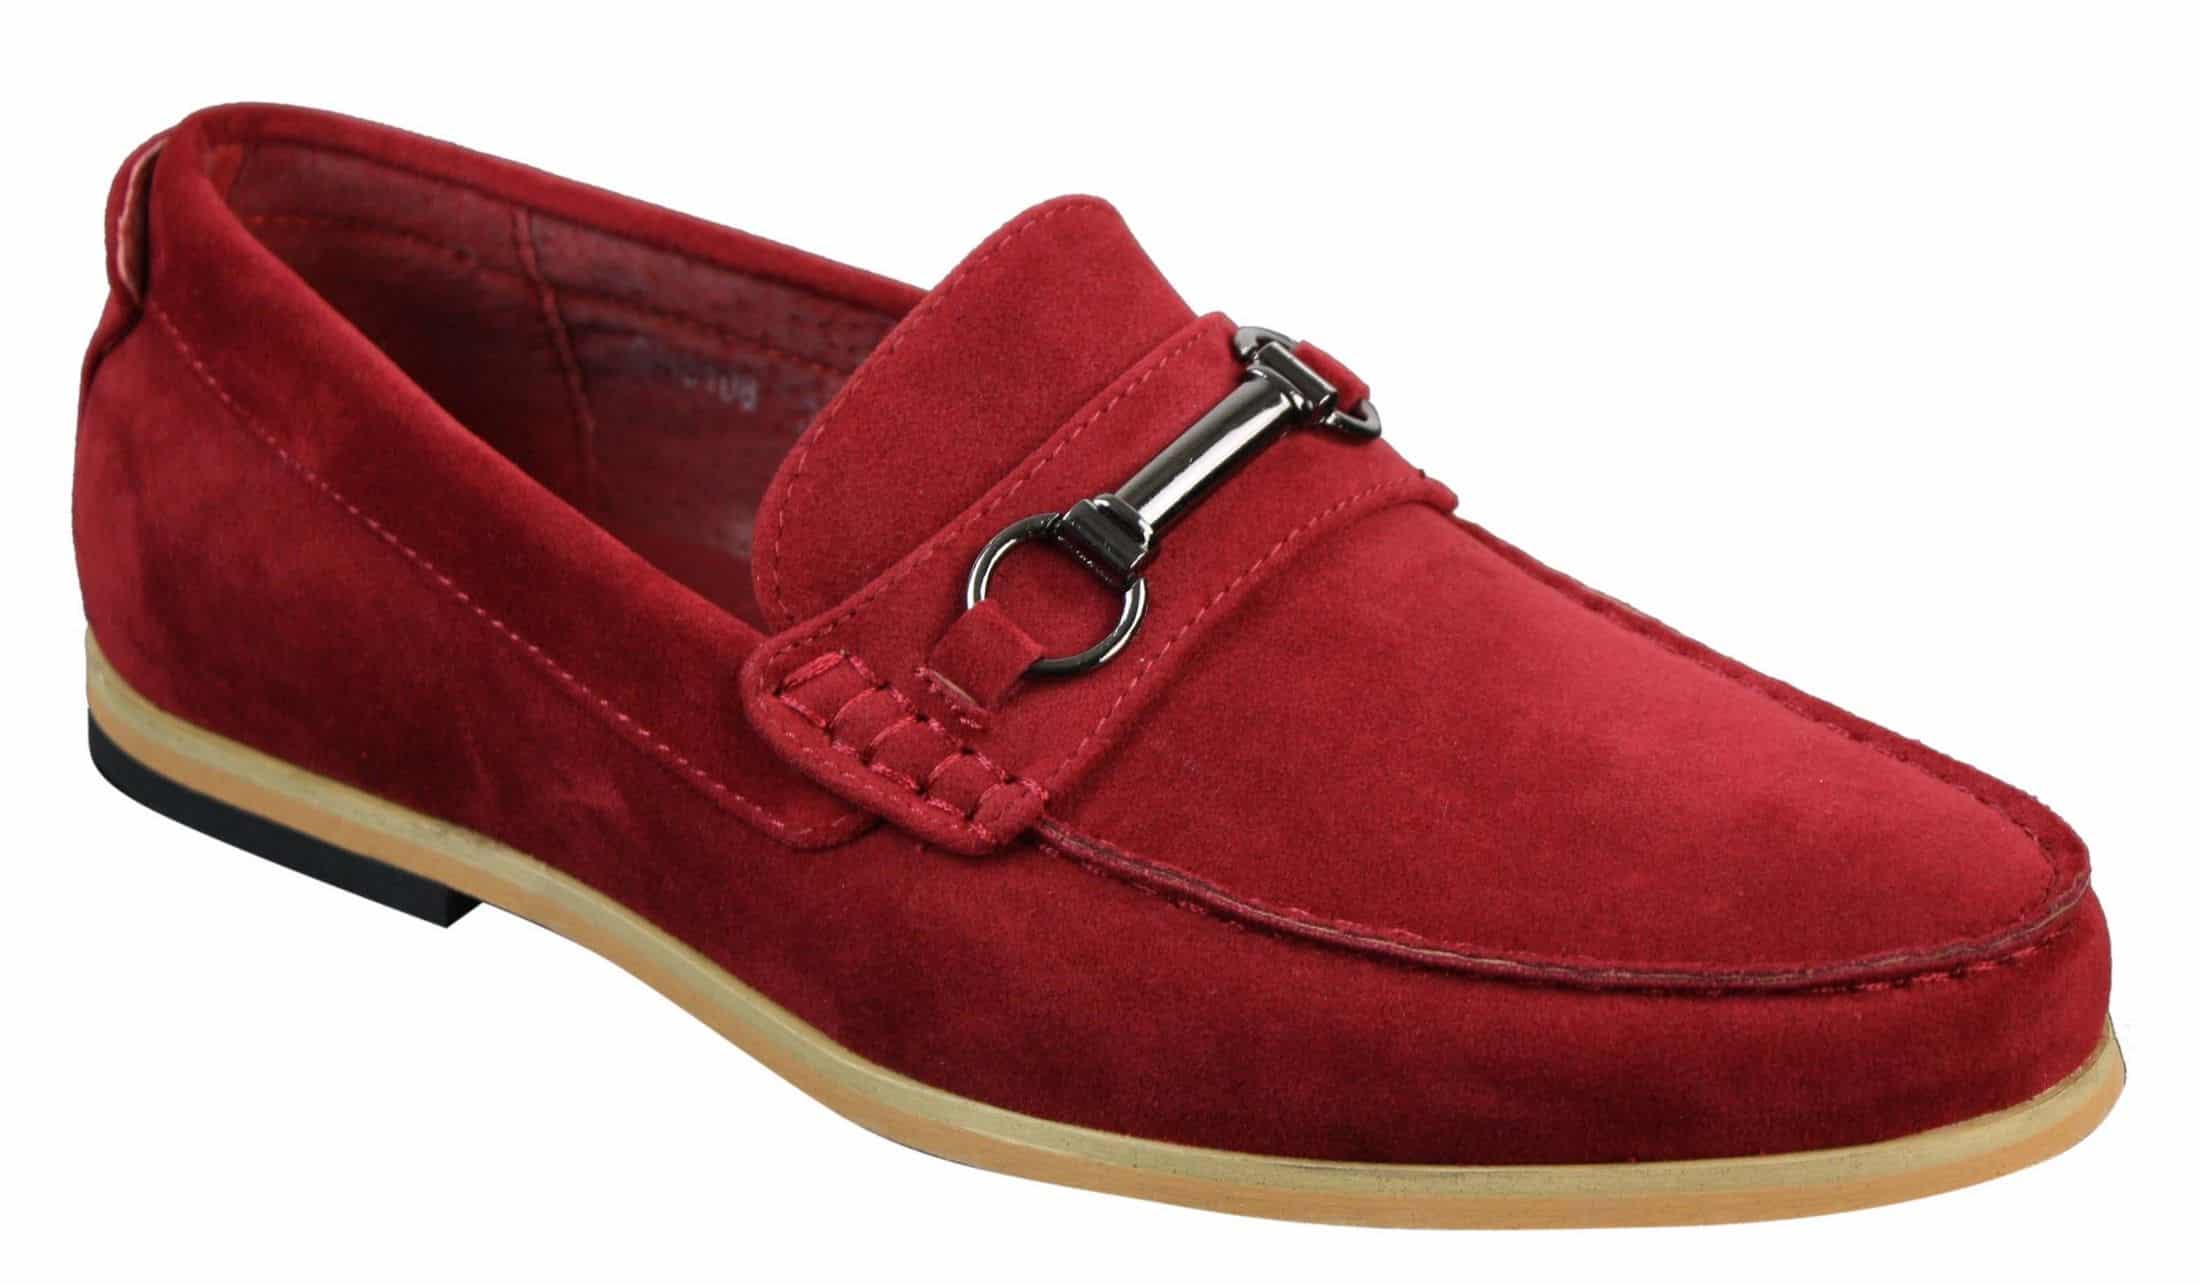 Red Buckle Loafer